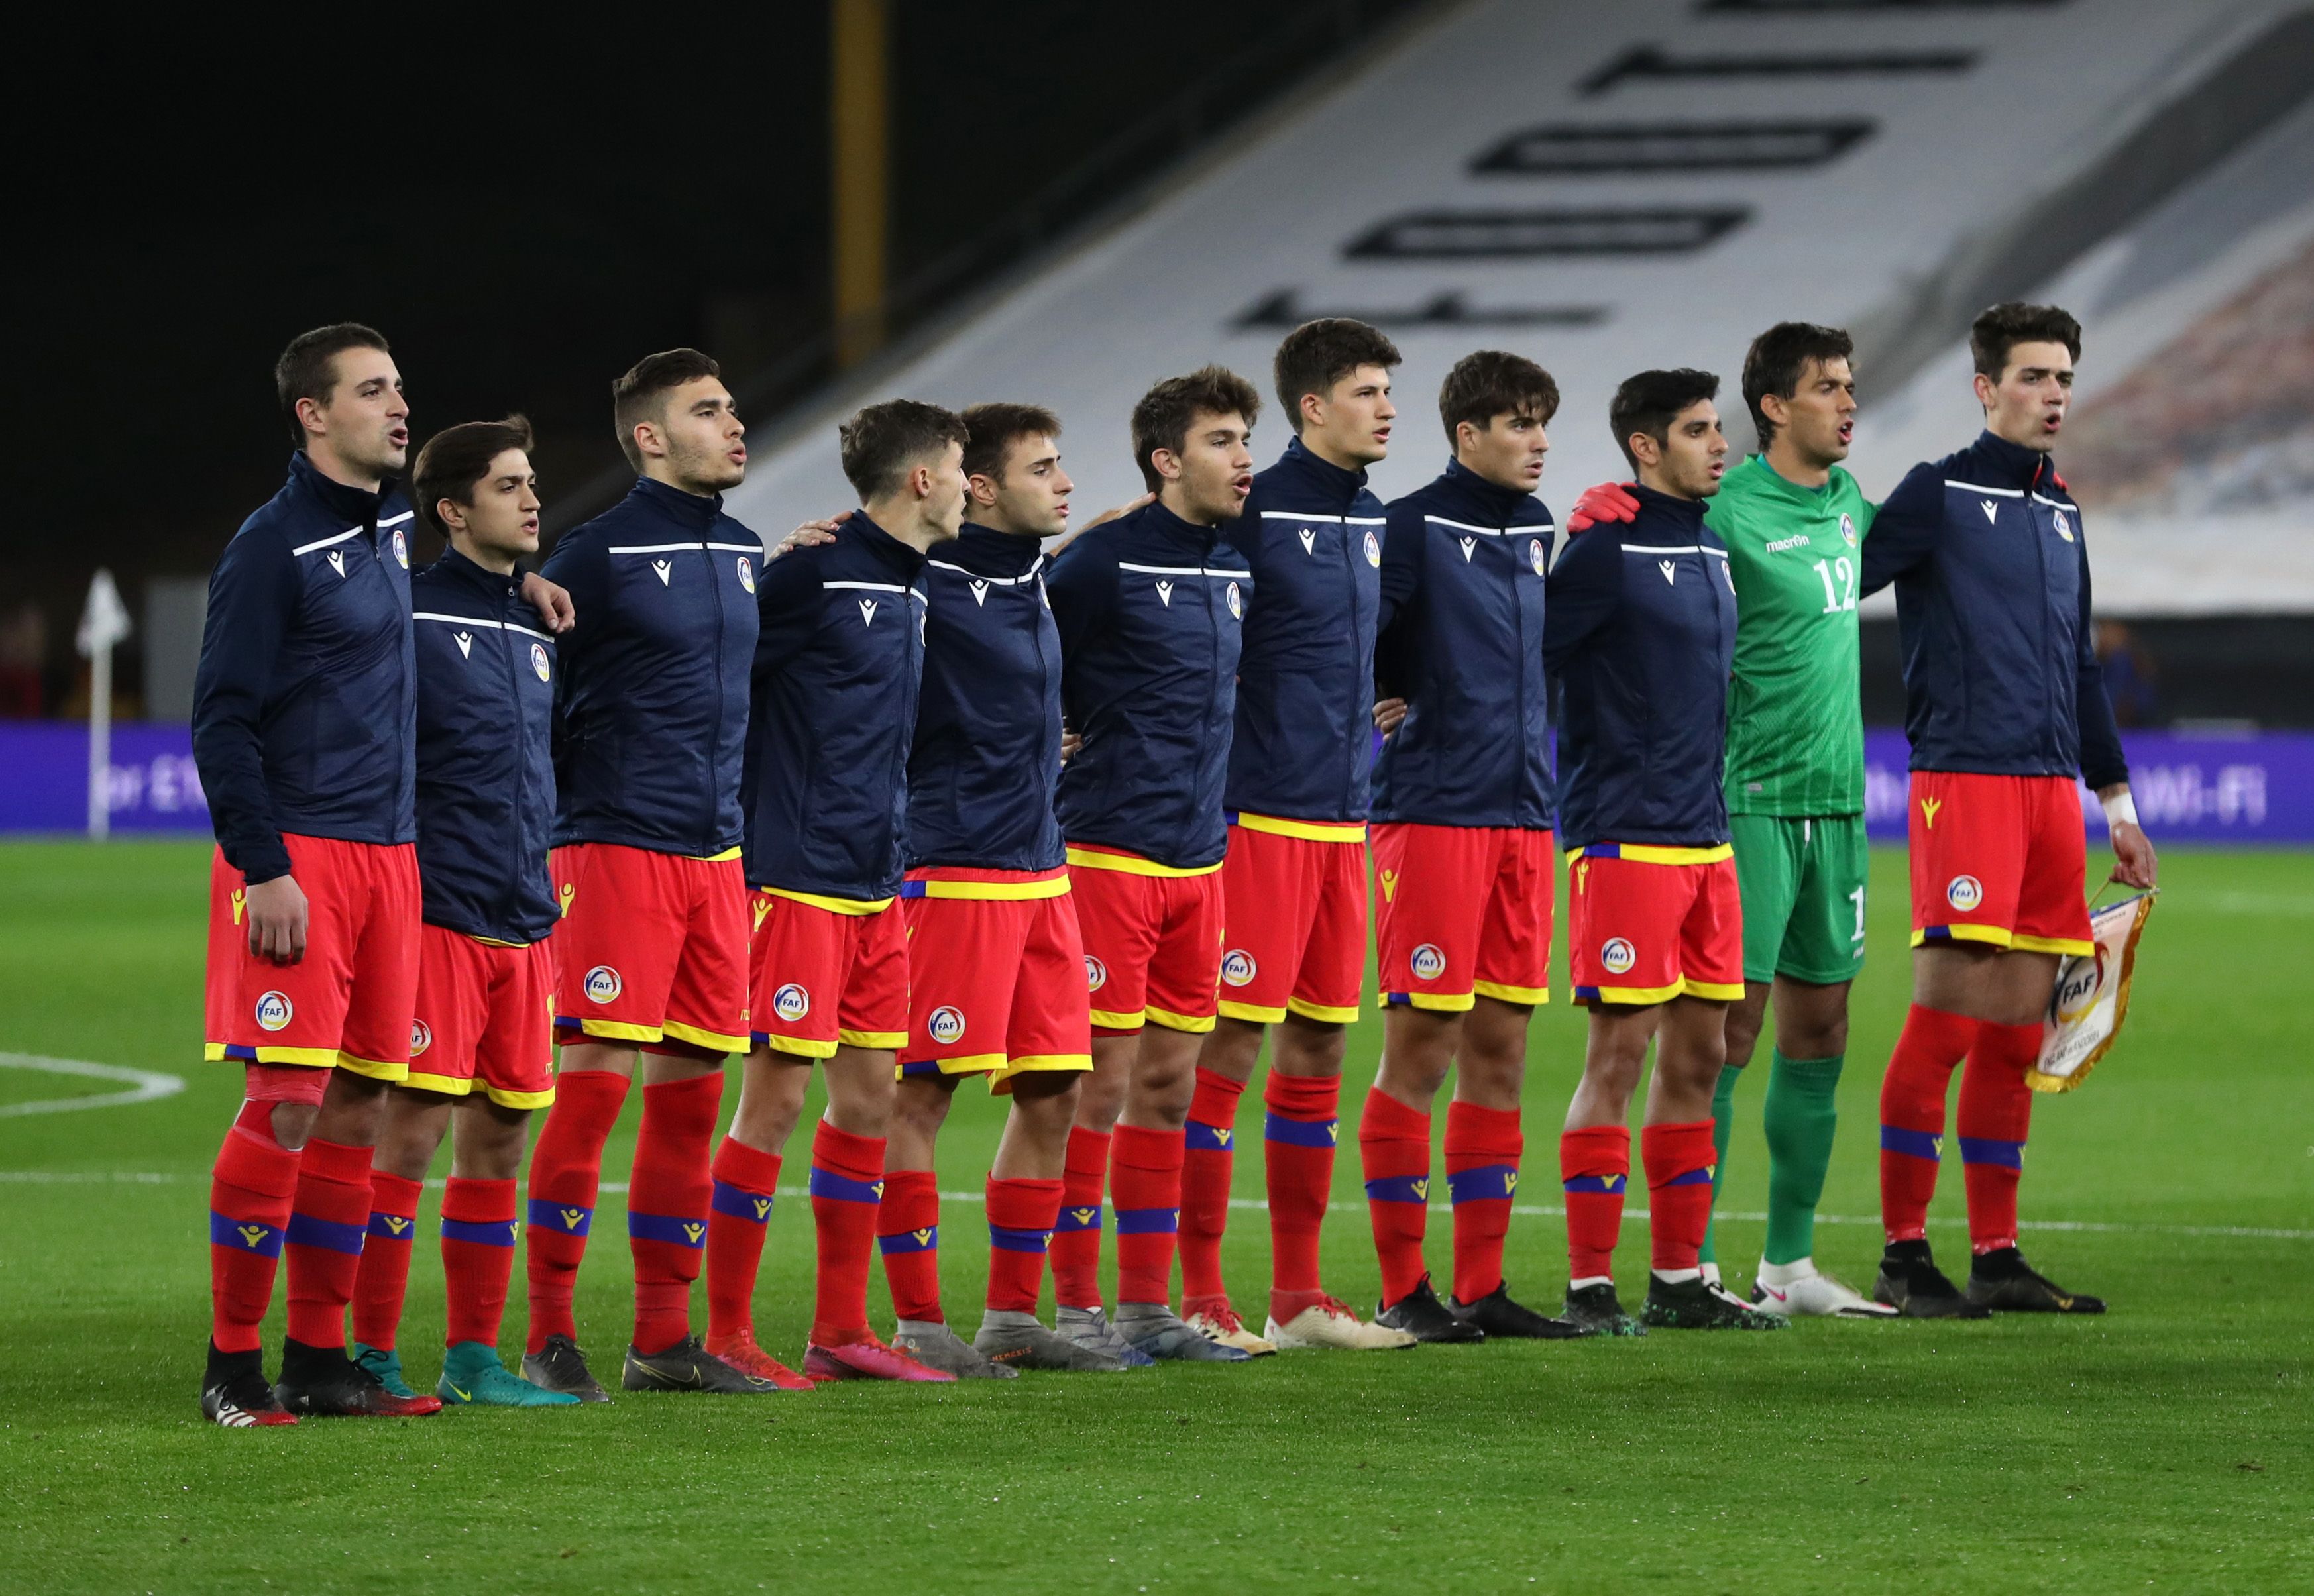 The Andorra team line up ahead the UEFA Euro Under 21 Qualifier match between England U21 and Andorra U21 at Molineux